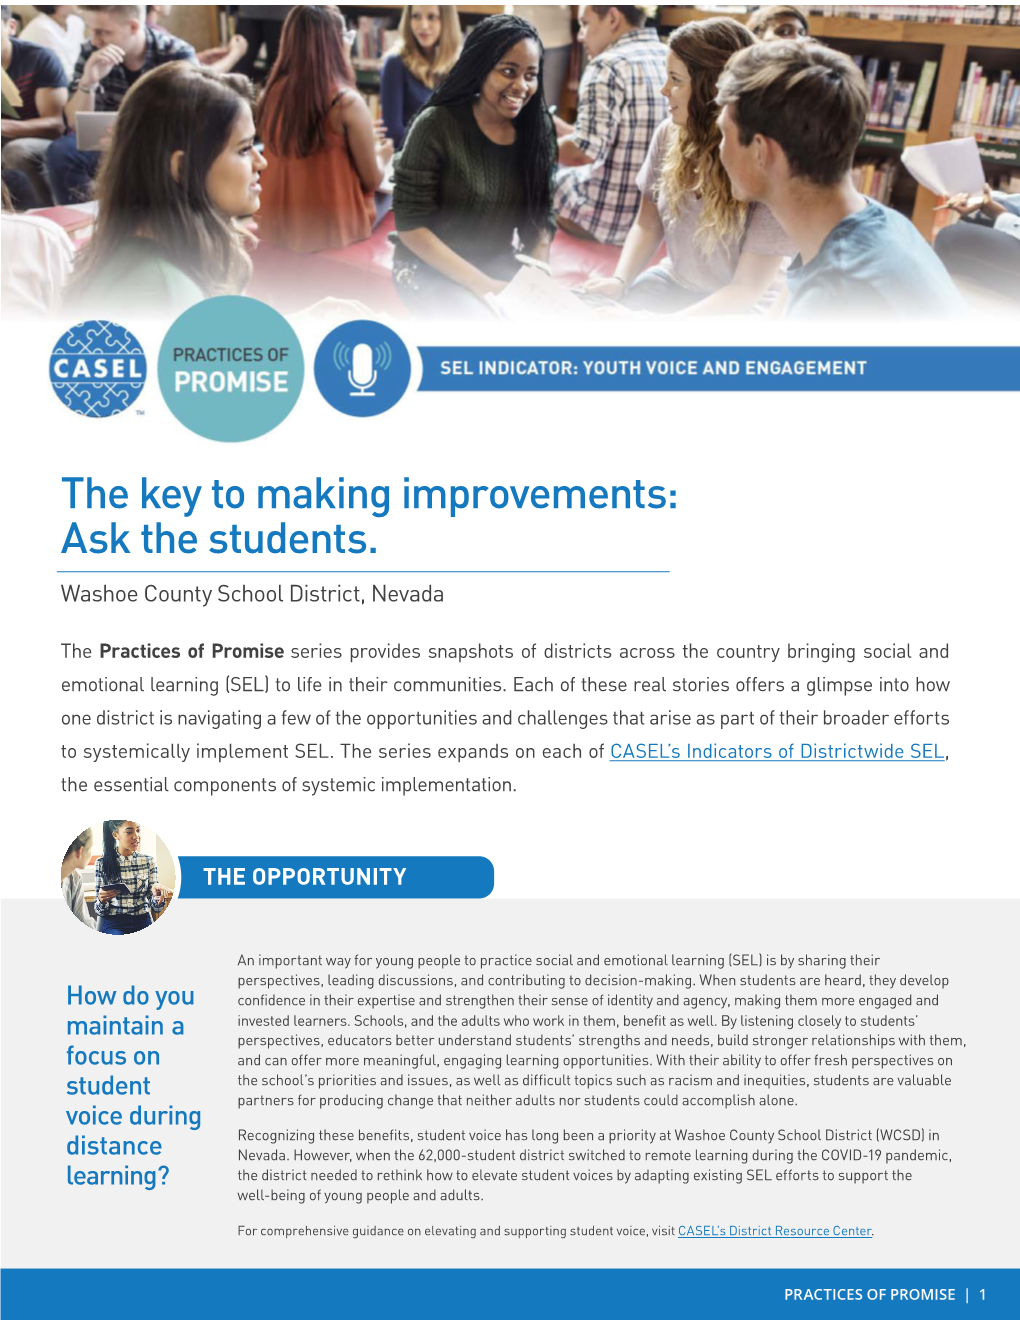 The Key to Making Improvements: Ask the Students. Washoe County School District, Nevada